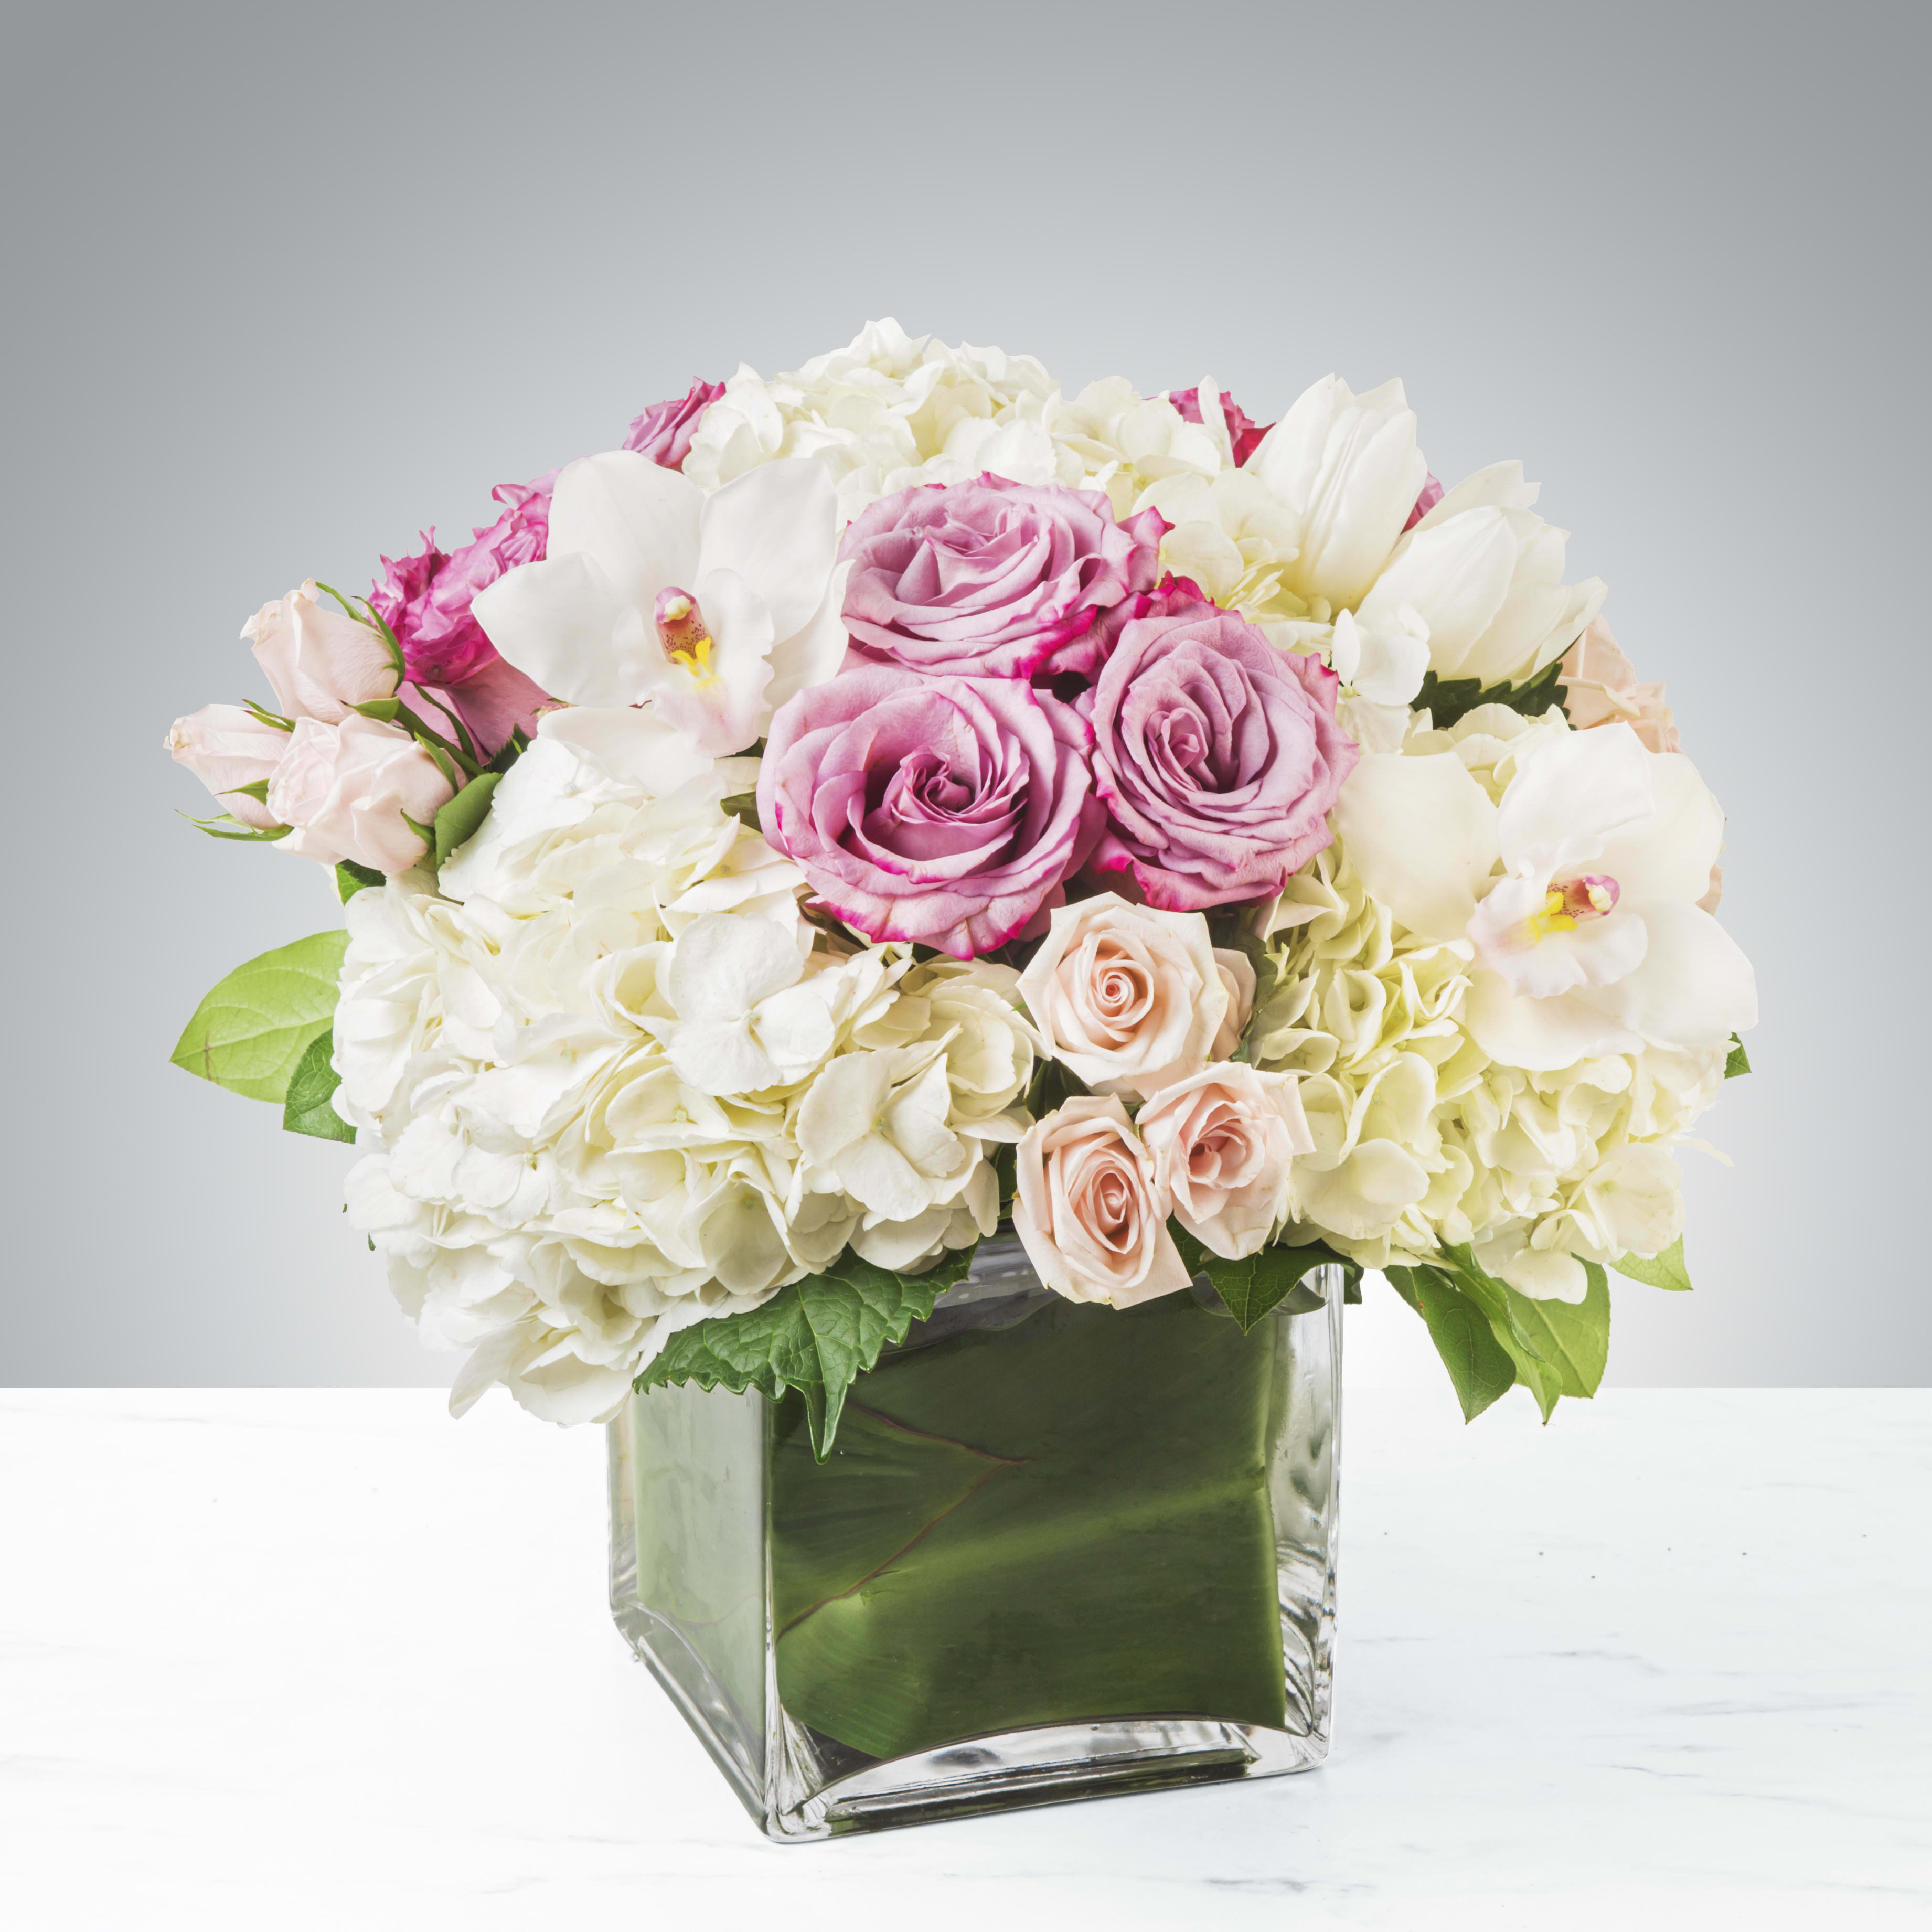 Carolina by BloomNation™ - Classic and Beautiful, this large arrangement whispers luxury. Soft pinks, whites and creams come together to create an appealingly feminine gift. Perfect for welcoming a new baby, wishing happy birthday or saying congratulations.    